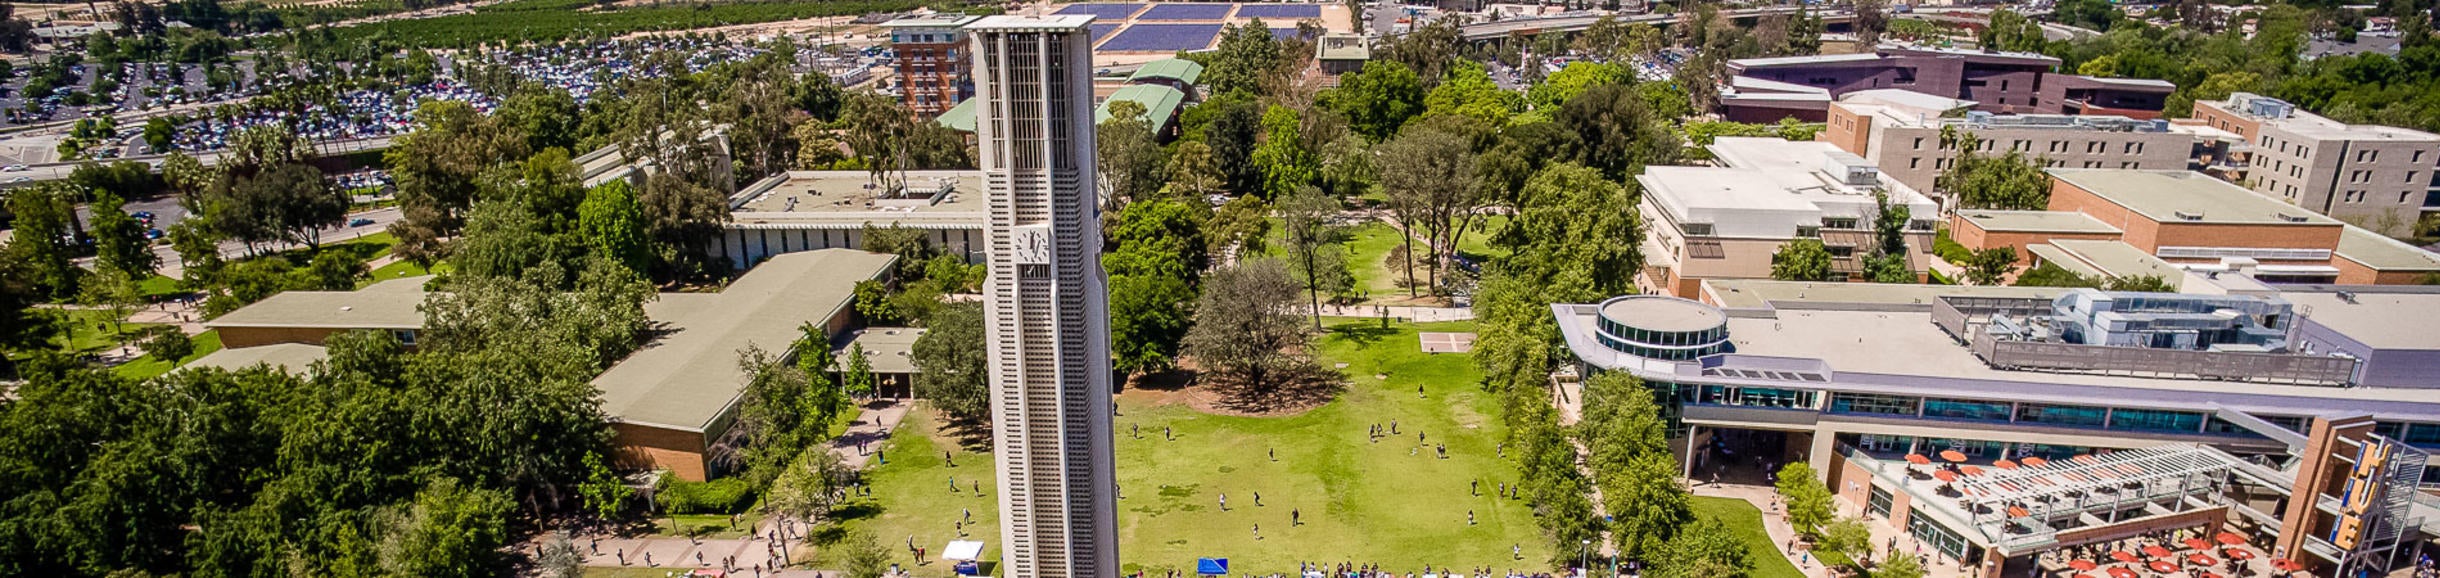 UC Riverside campus with bell tower, aerial view